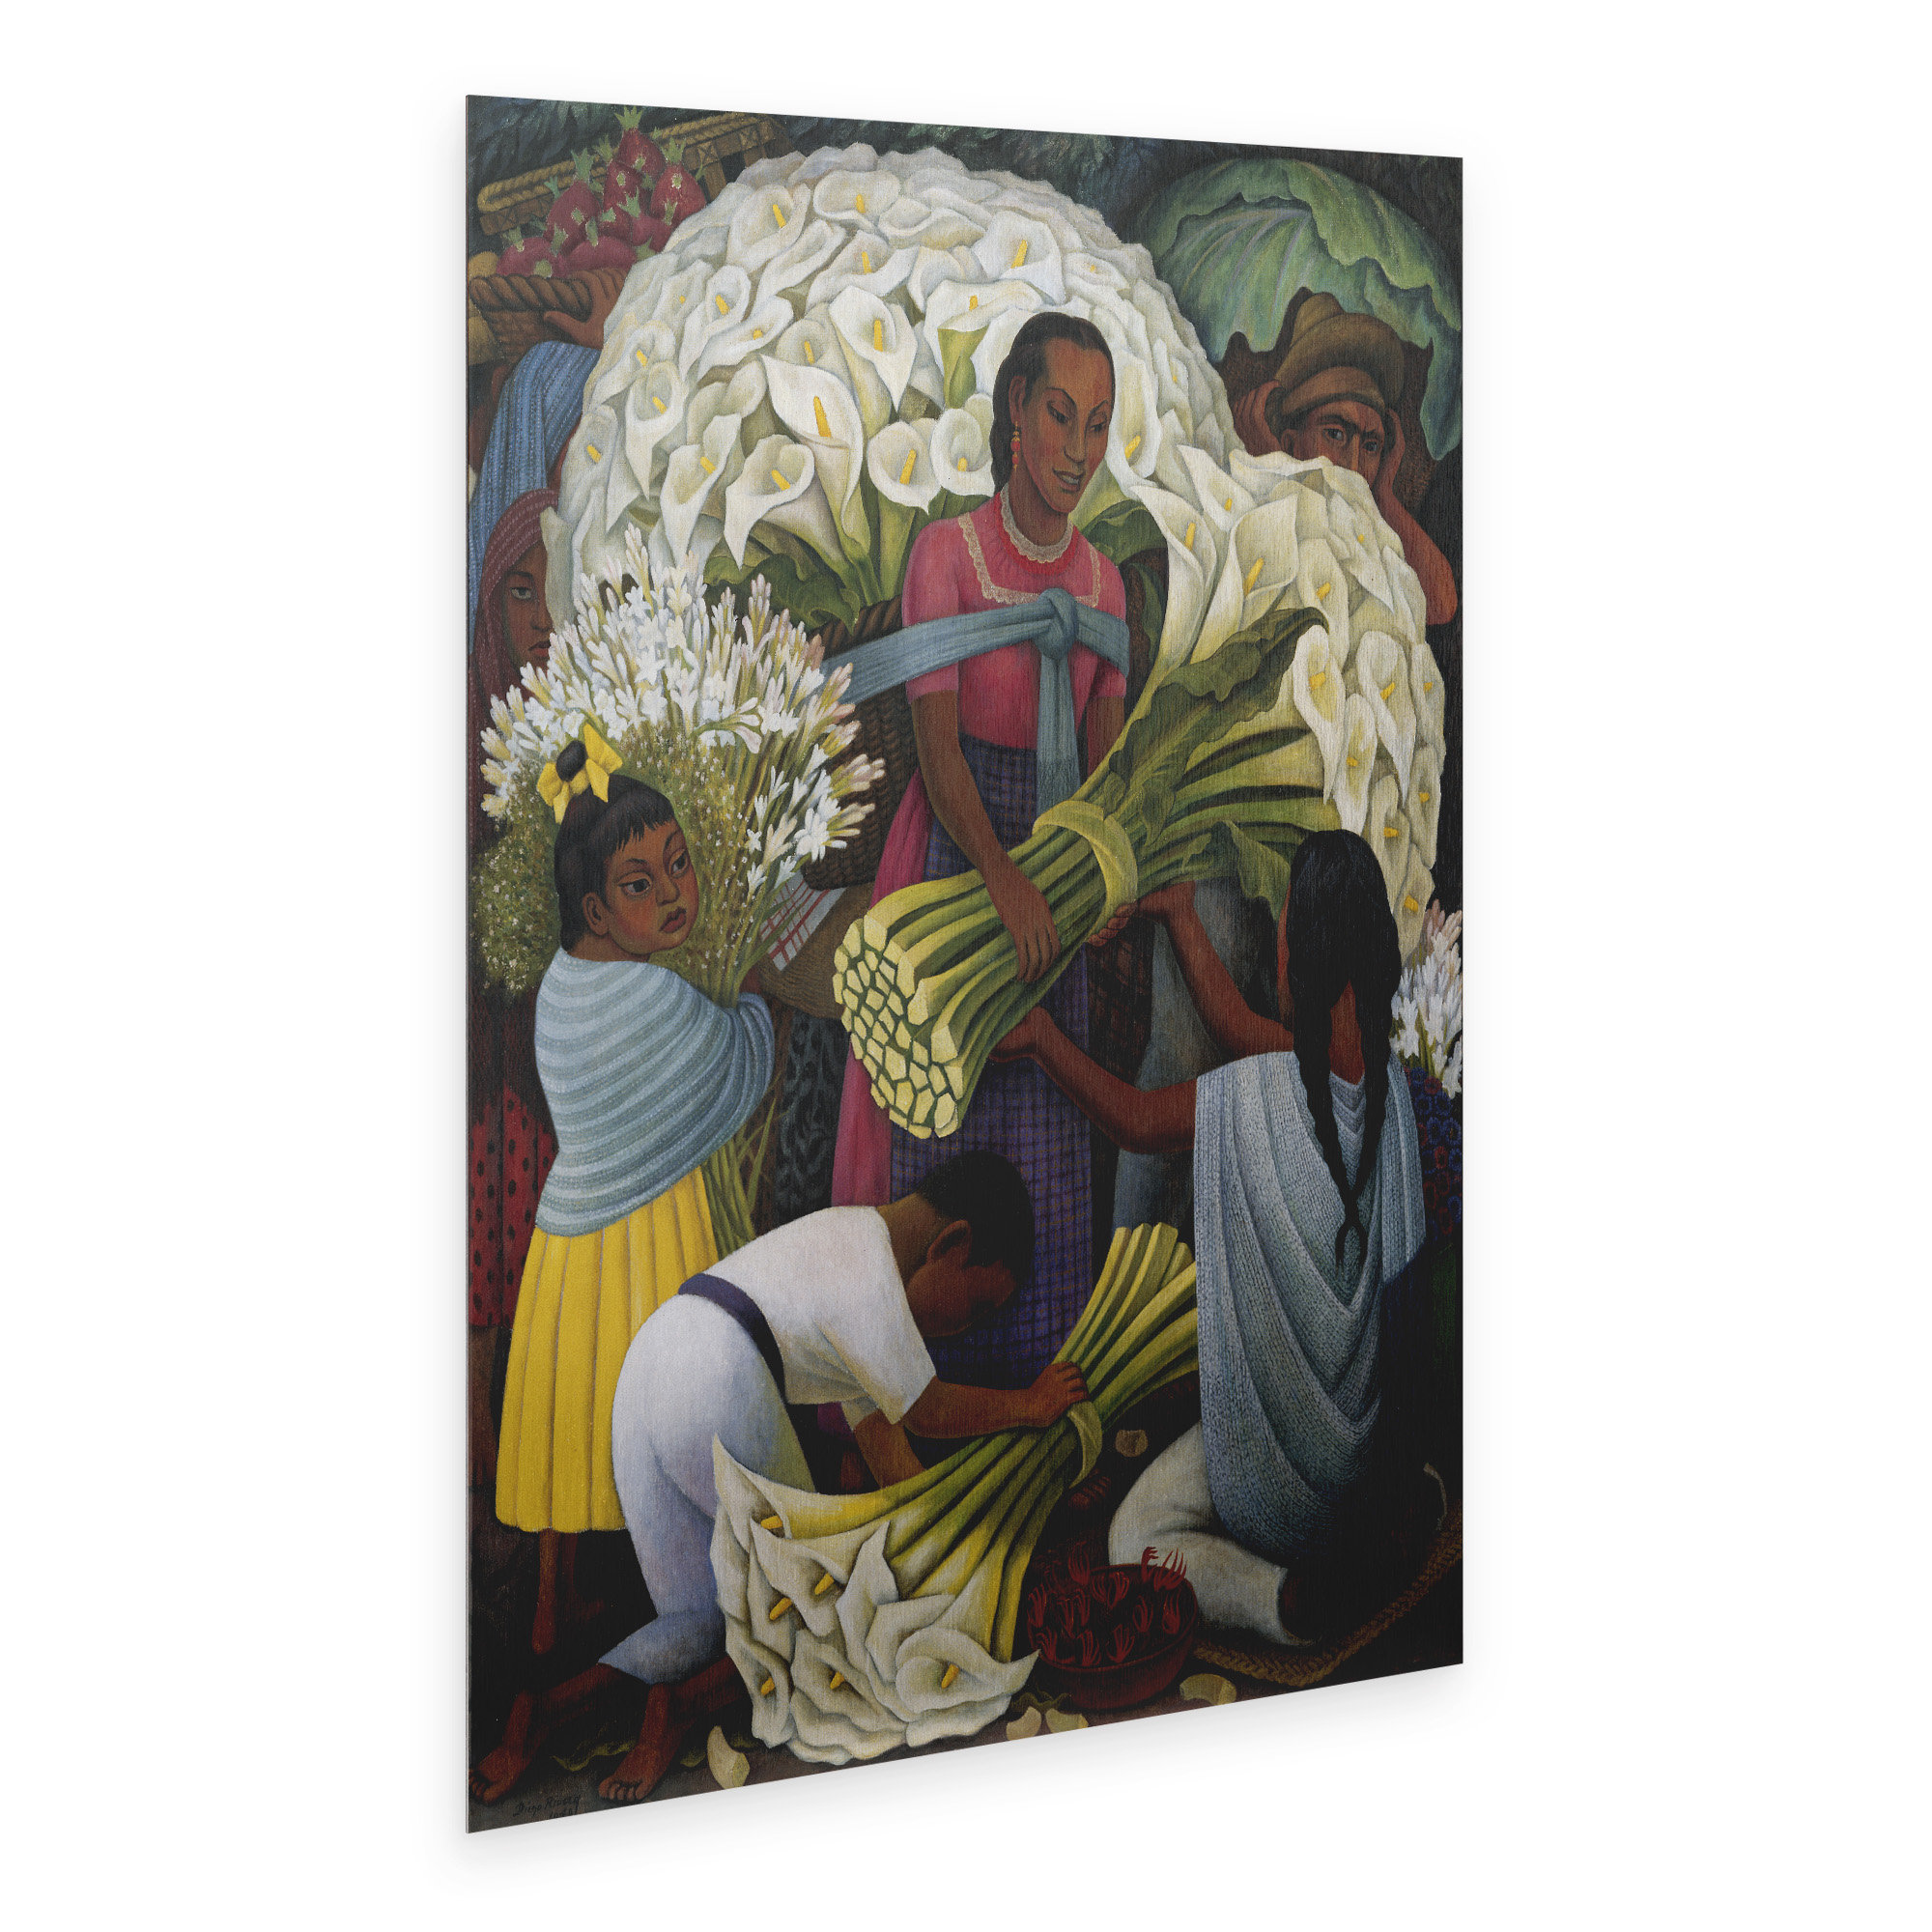 Red Barrel Studio® The Flower Vendor by Diego Rivera - Unframed Graphic ...